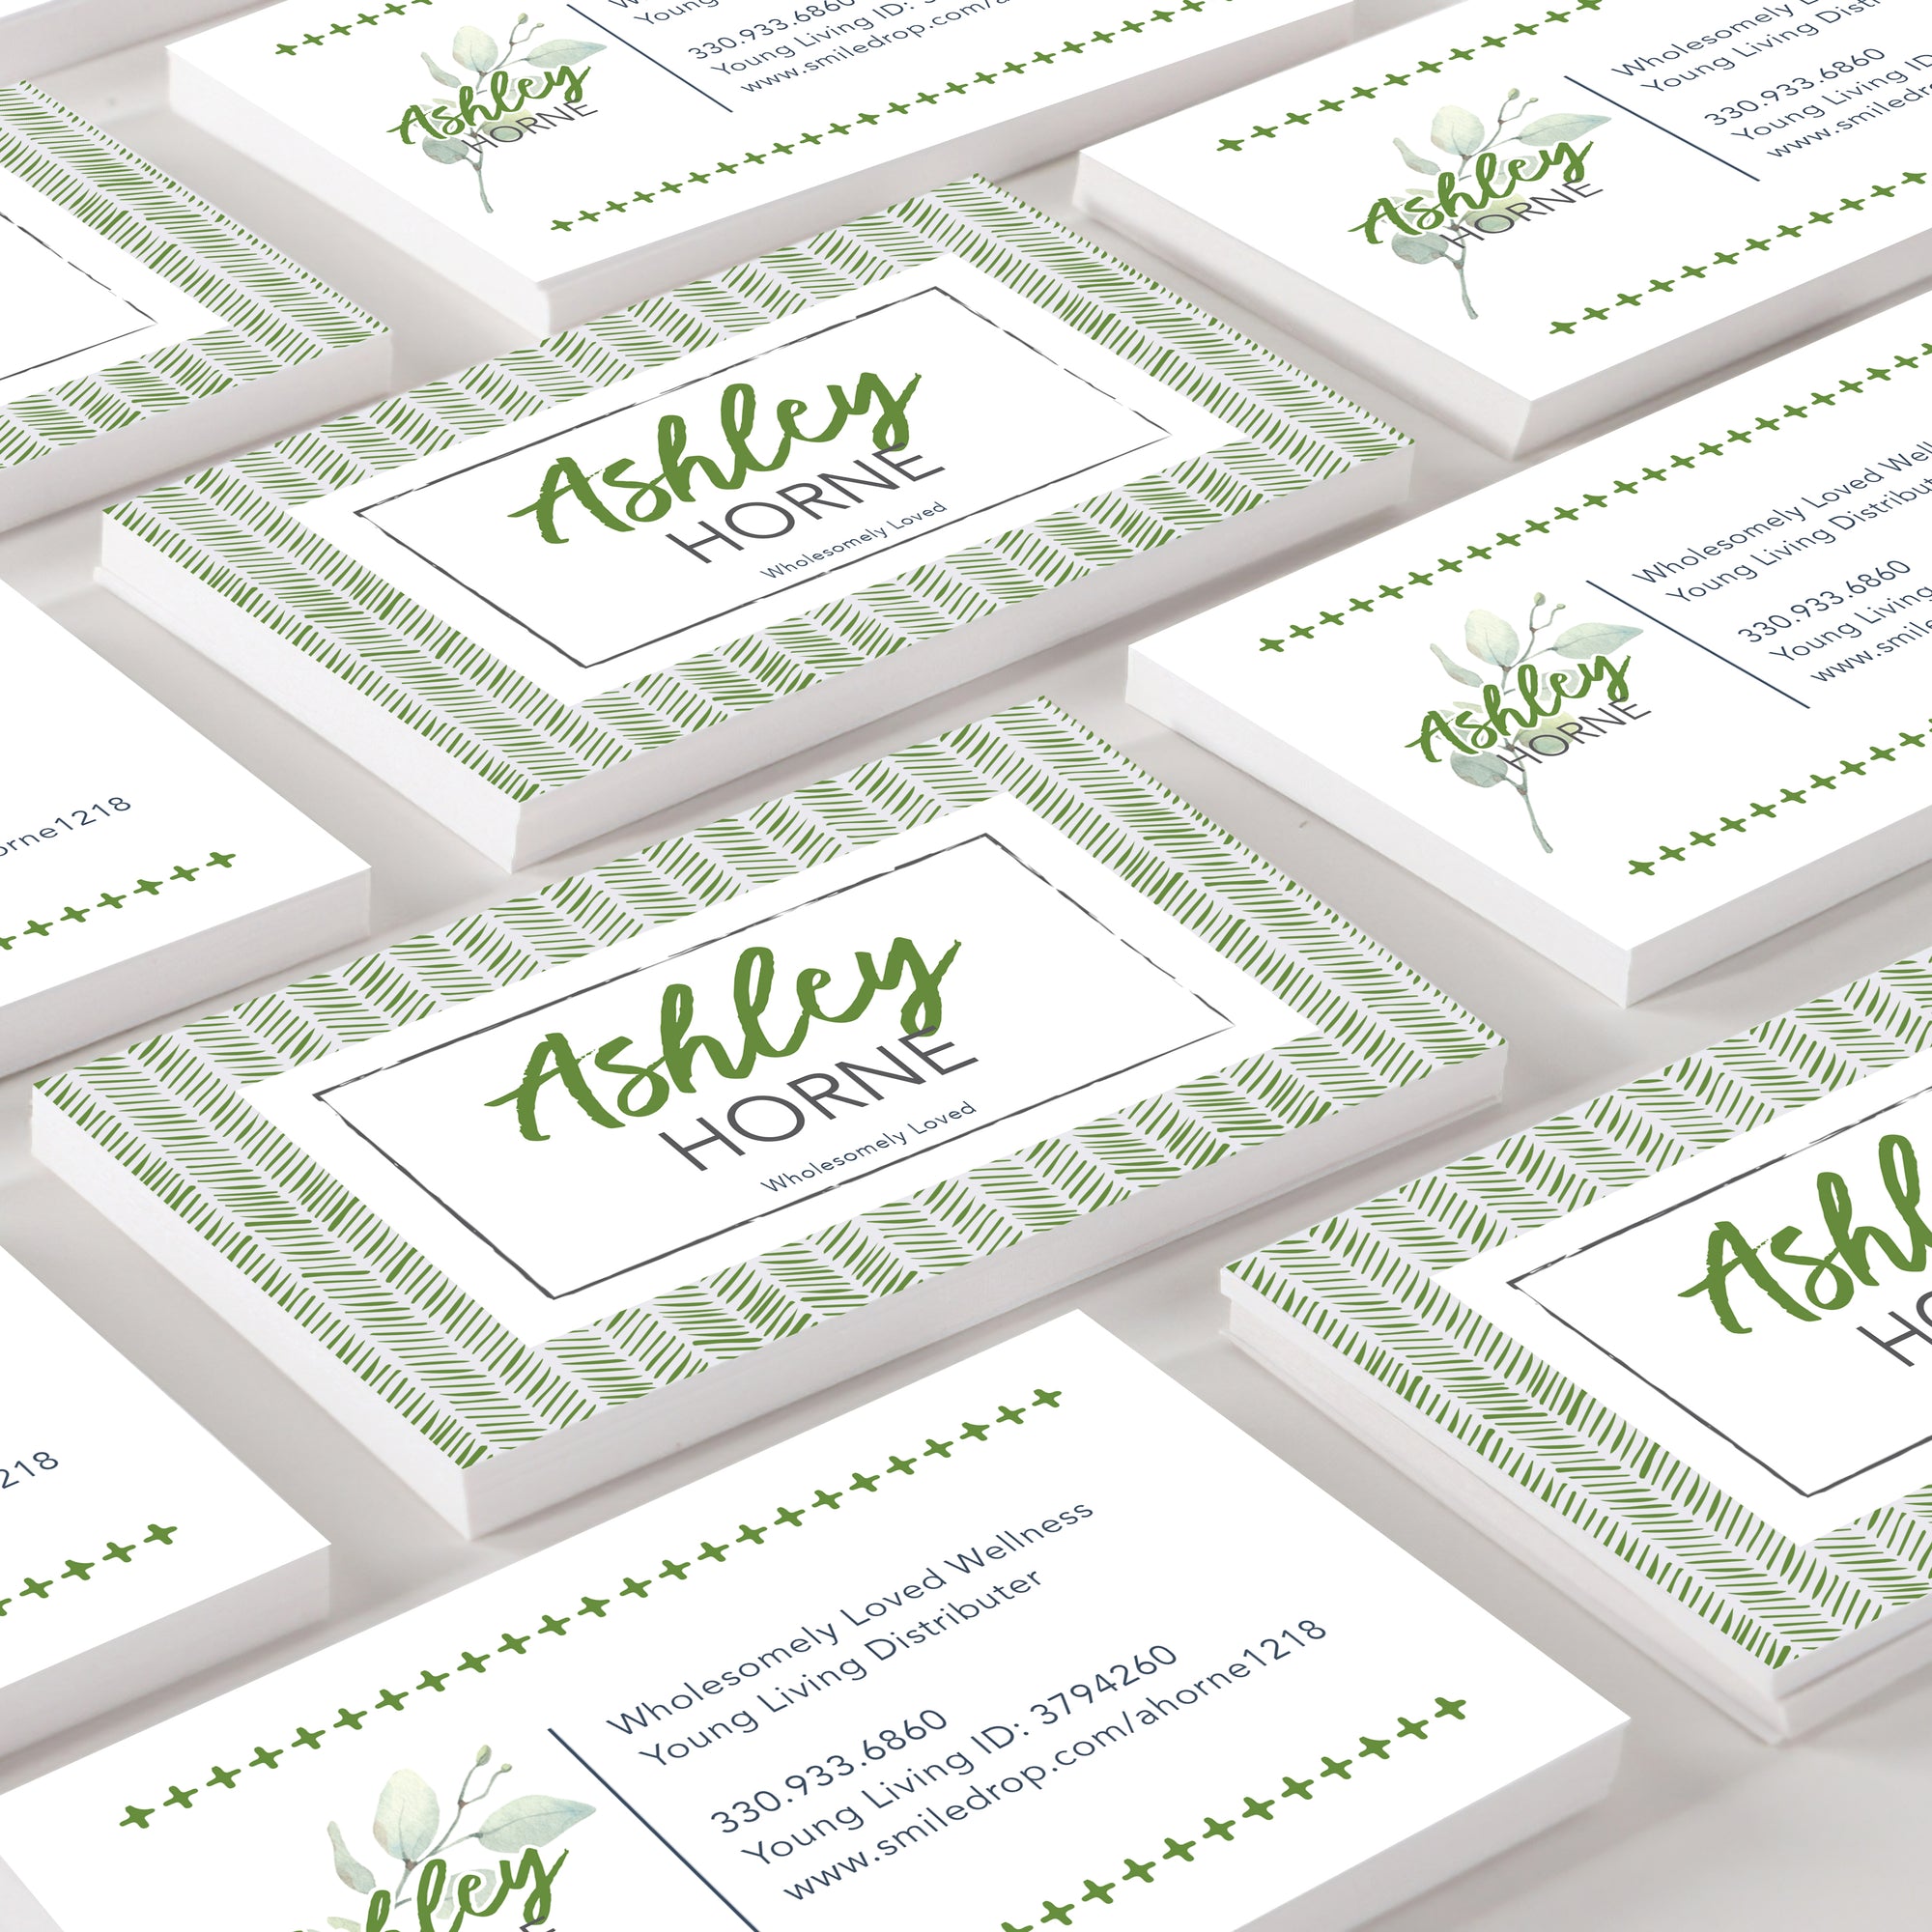 Handmade Business cards for small business